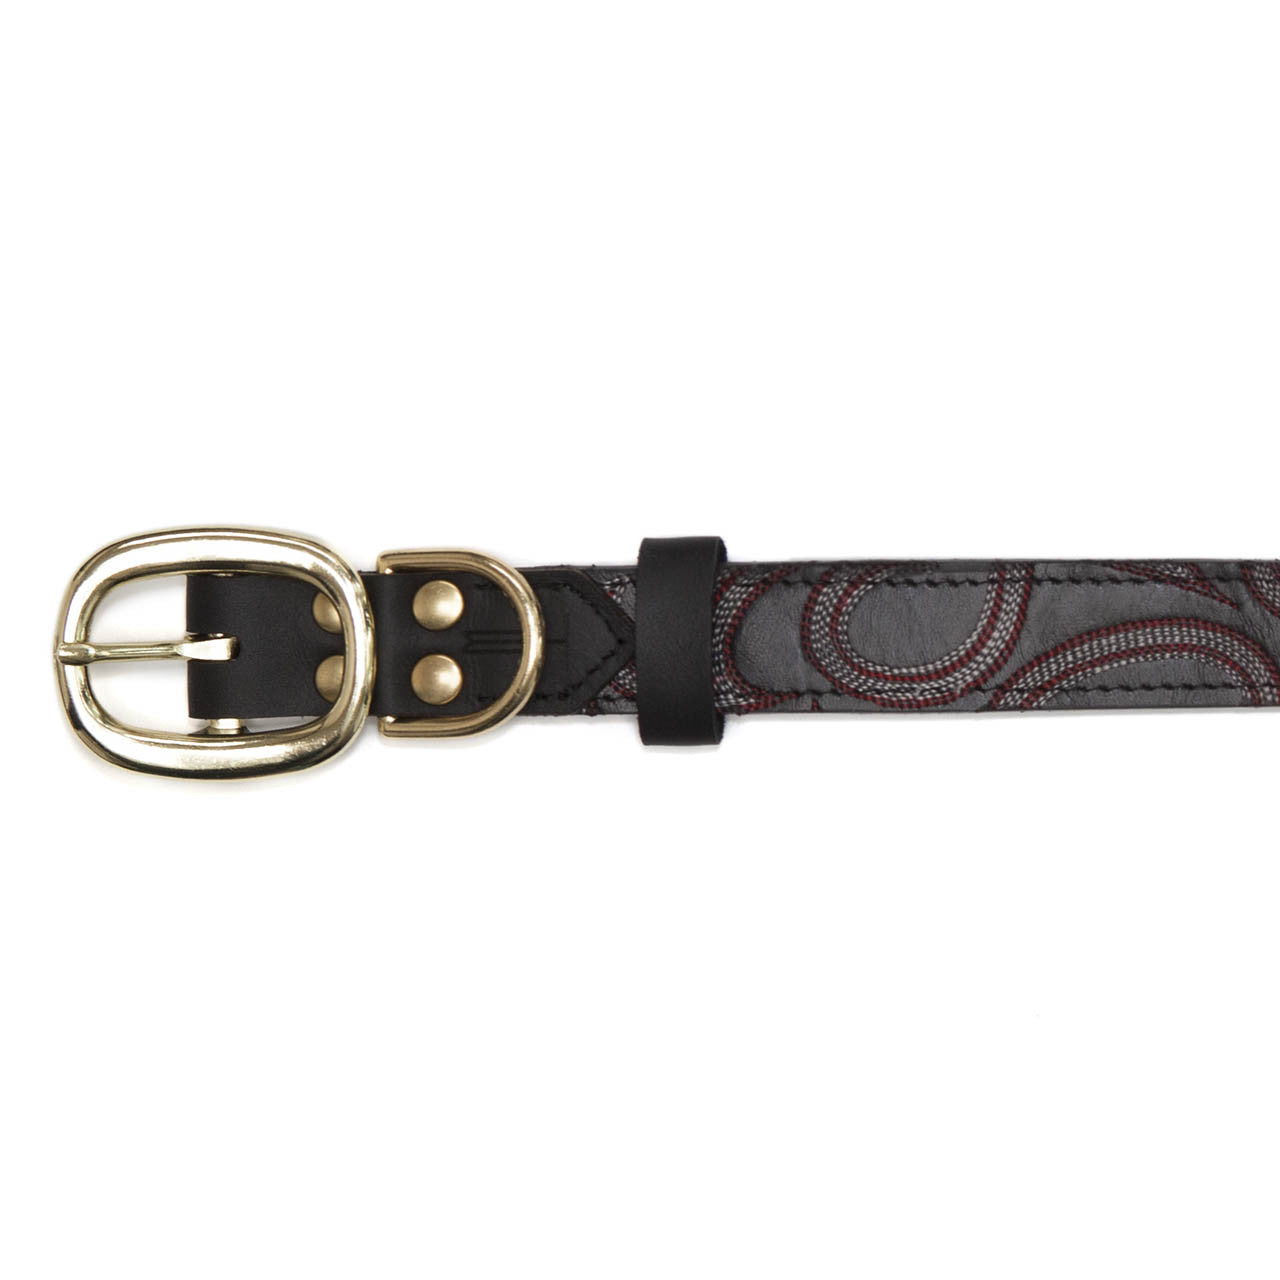 Black Dog Collar with Black Leather + Red/White Crest Stitching